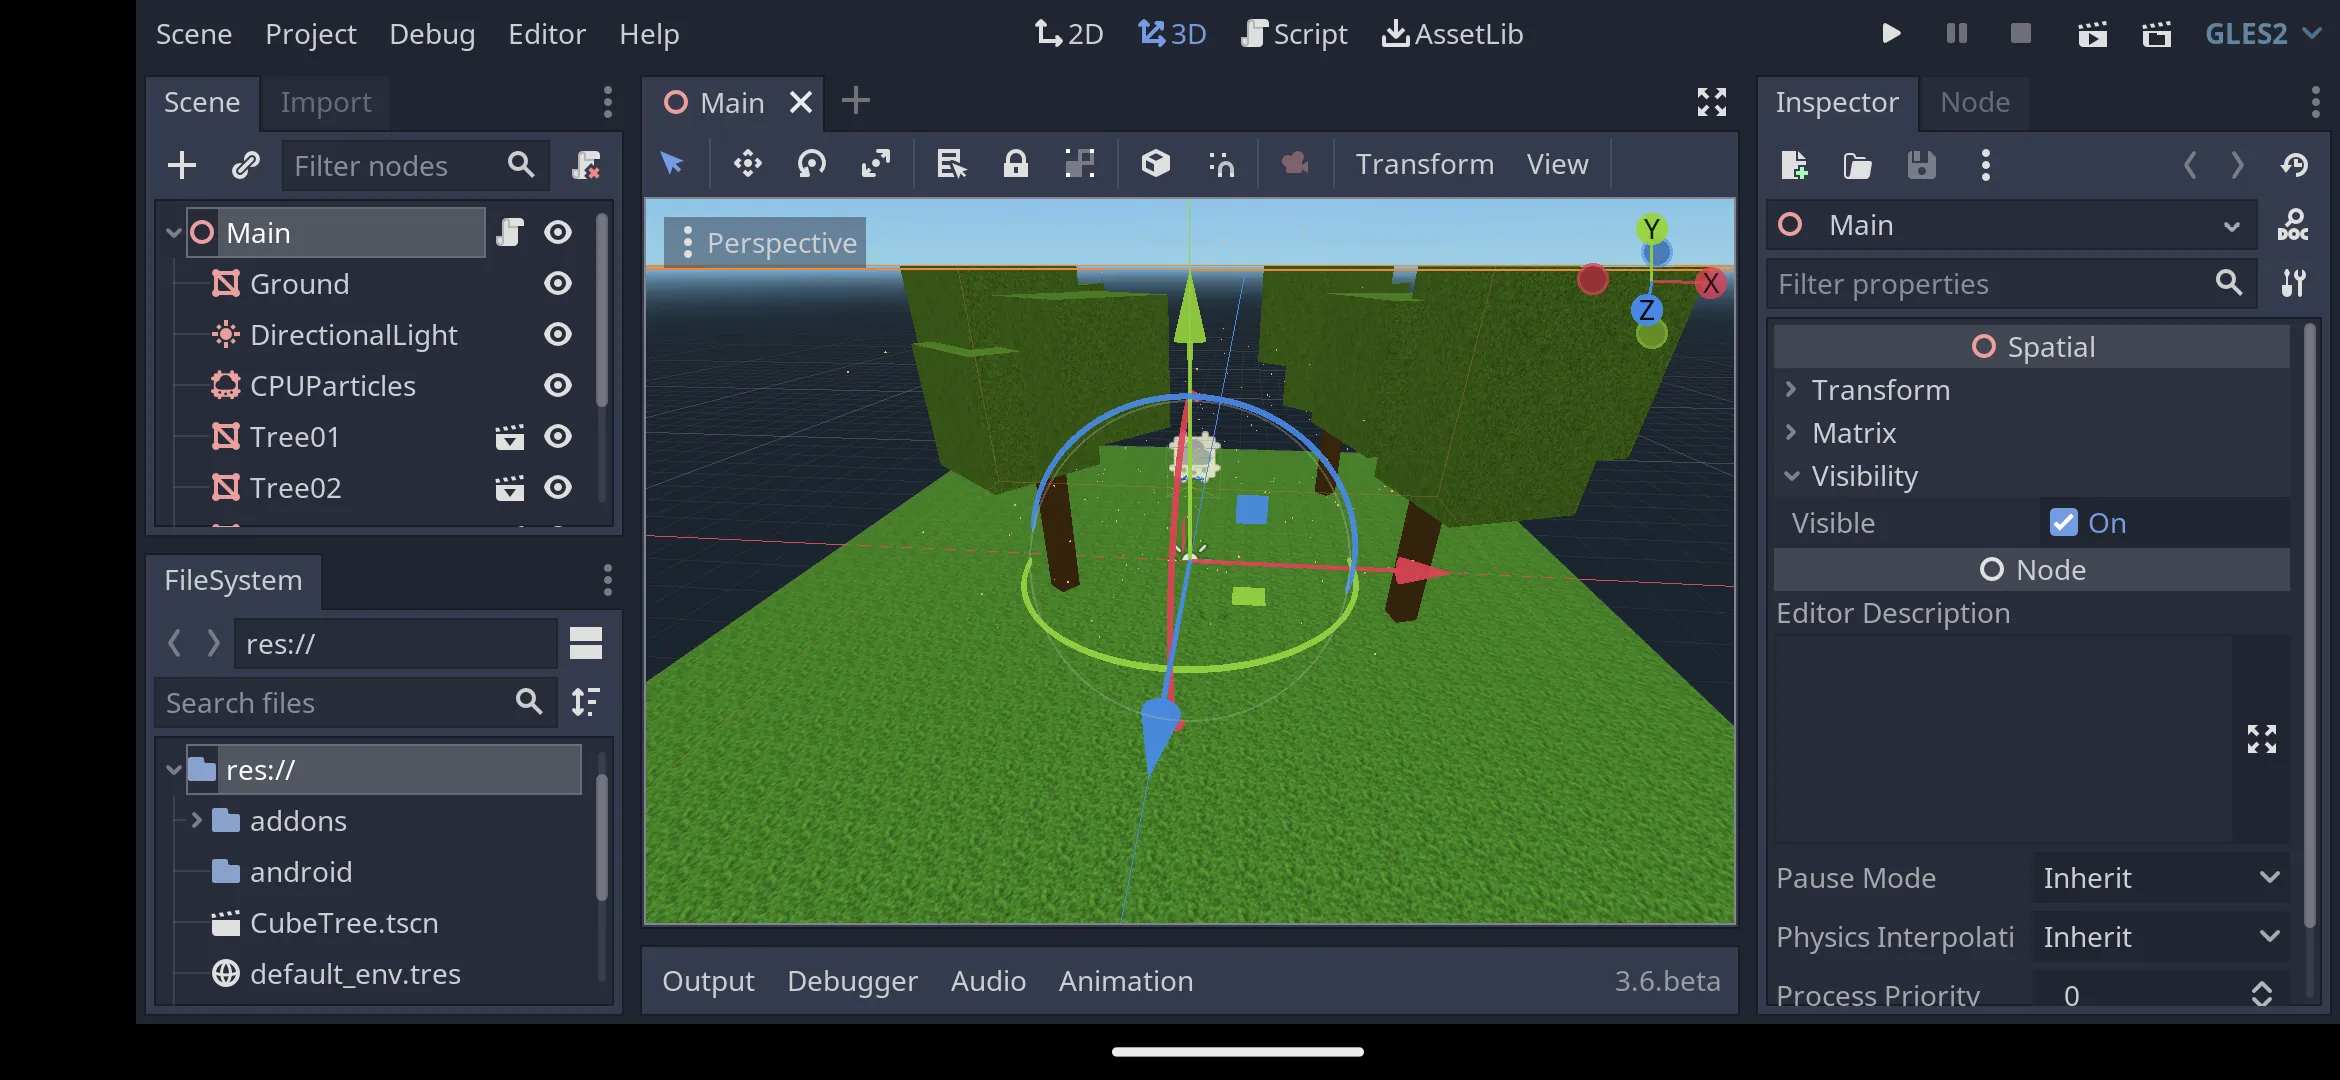 About the Godot Editor 4